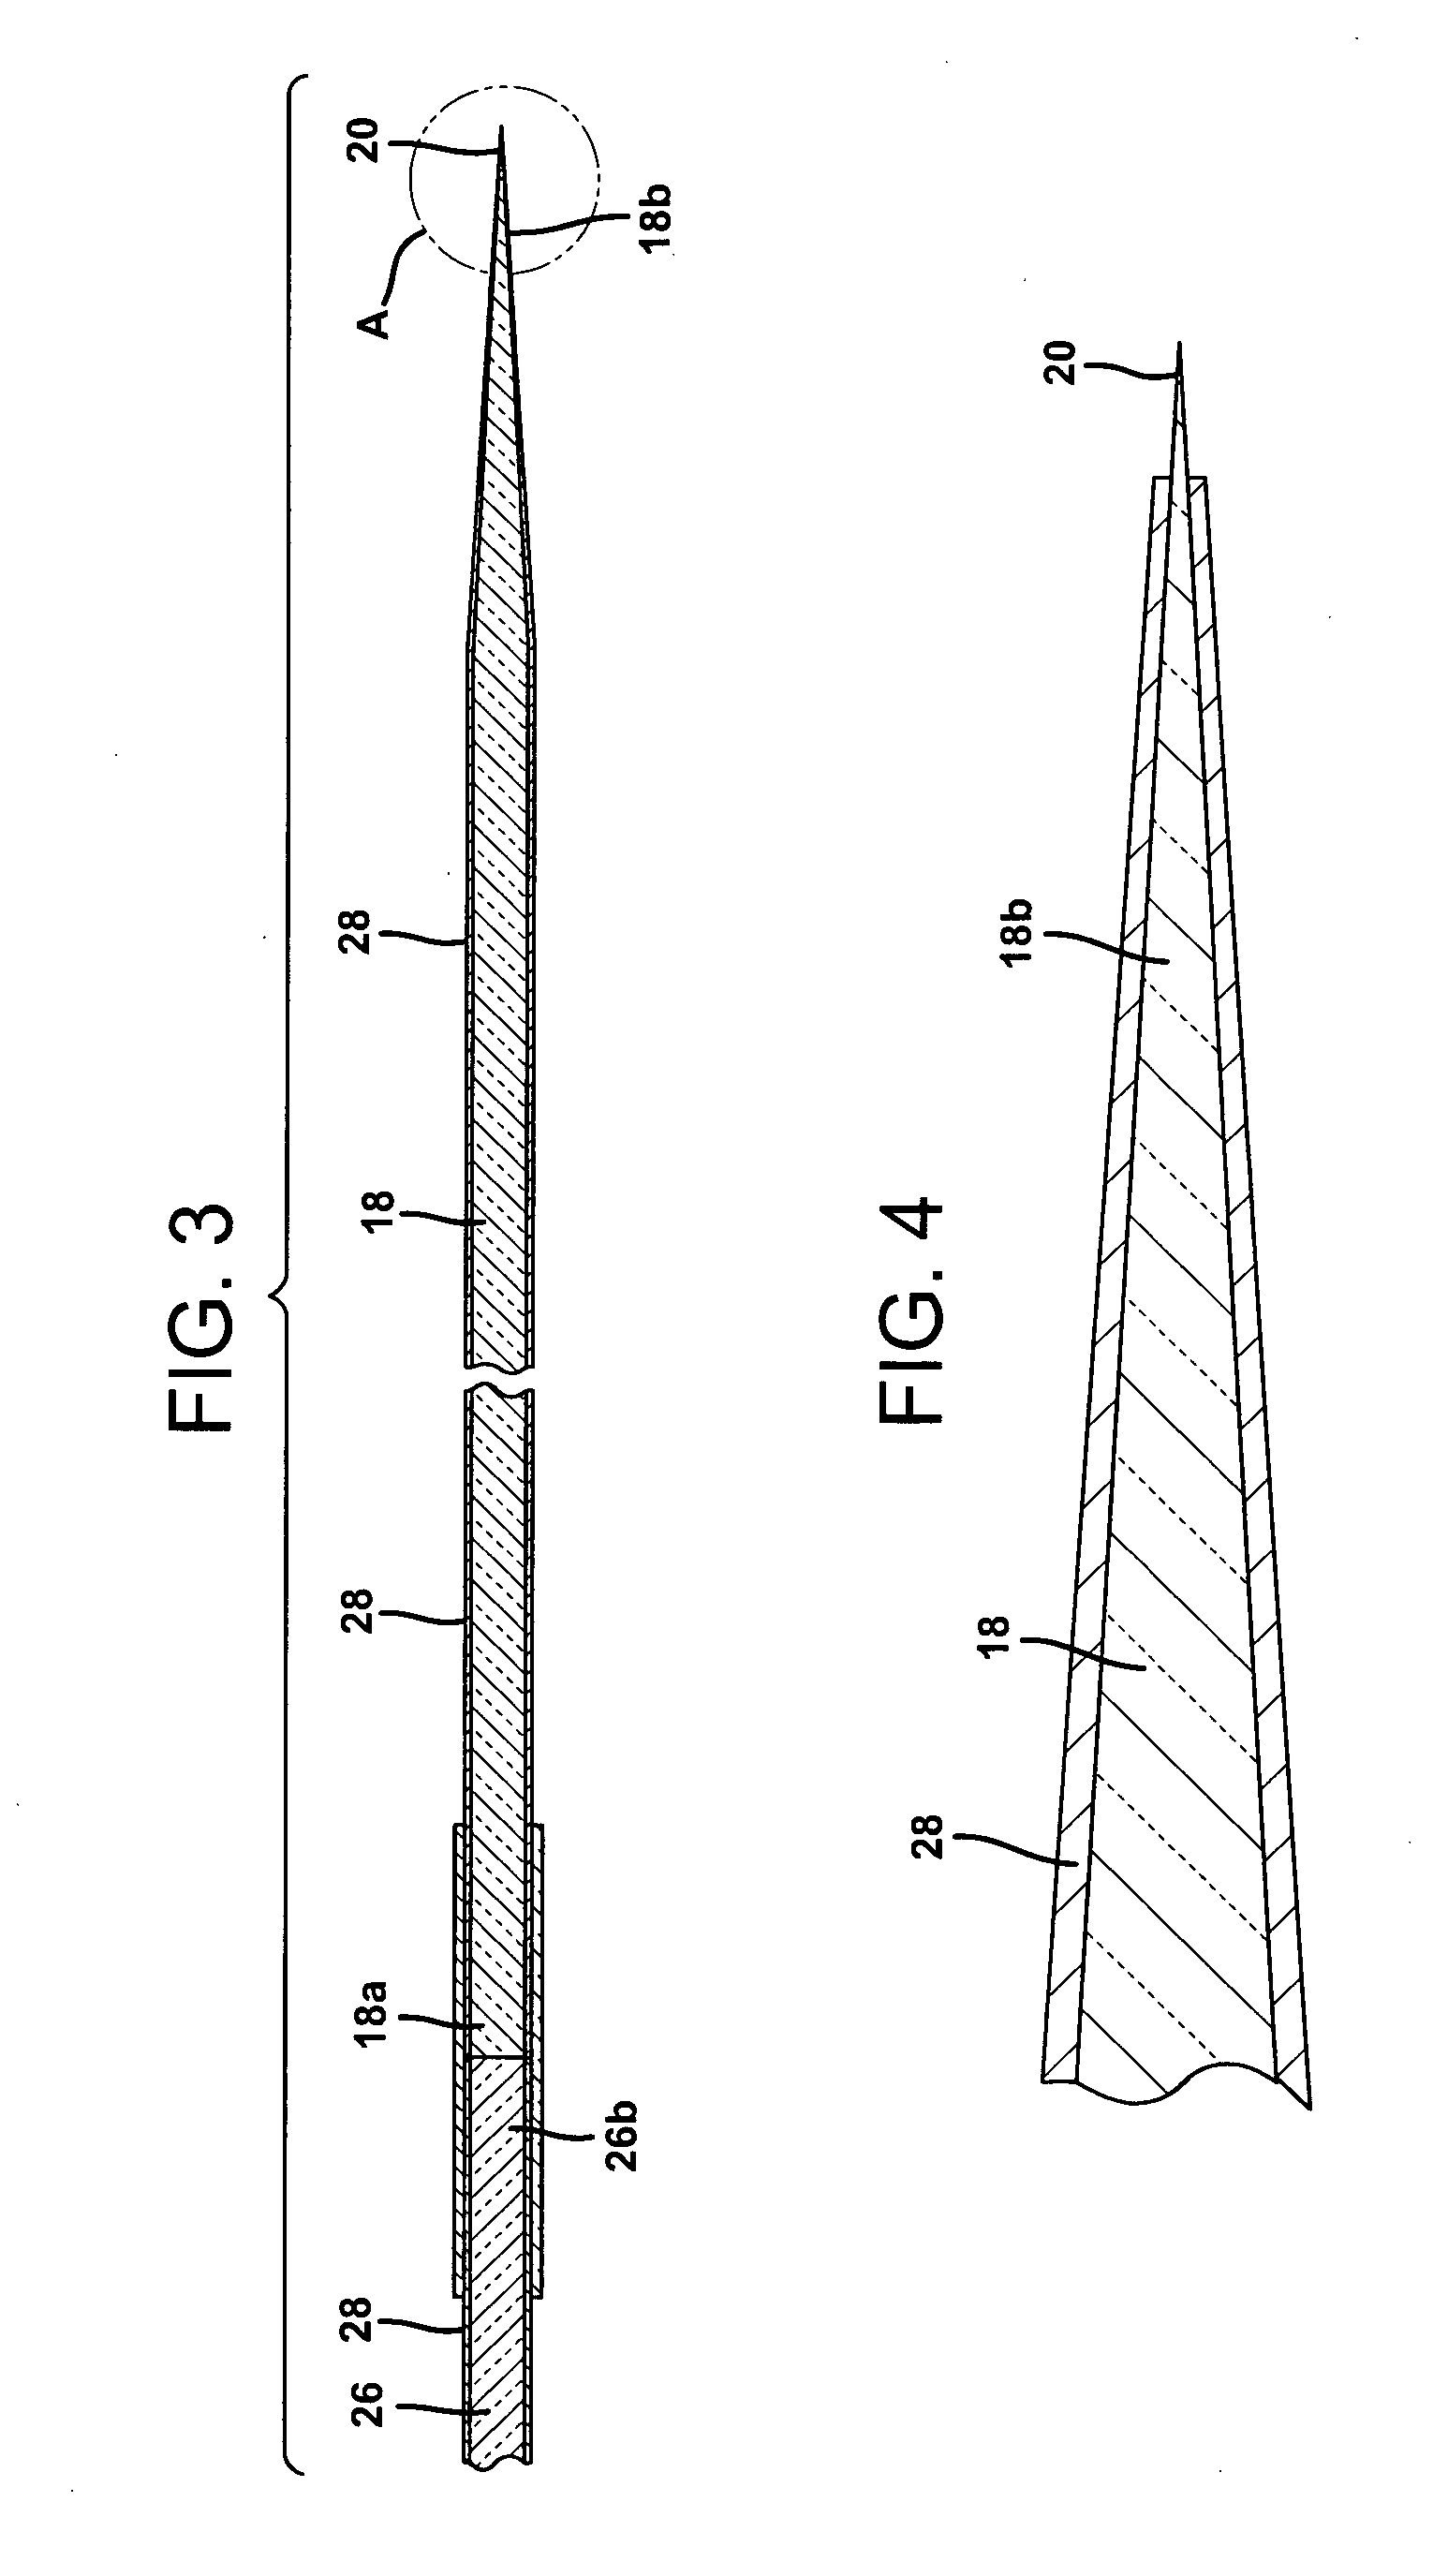 Apparatus and method for the point treatment of a patient by acupuncture and light